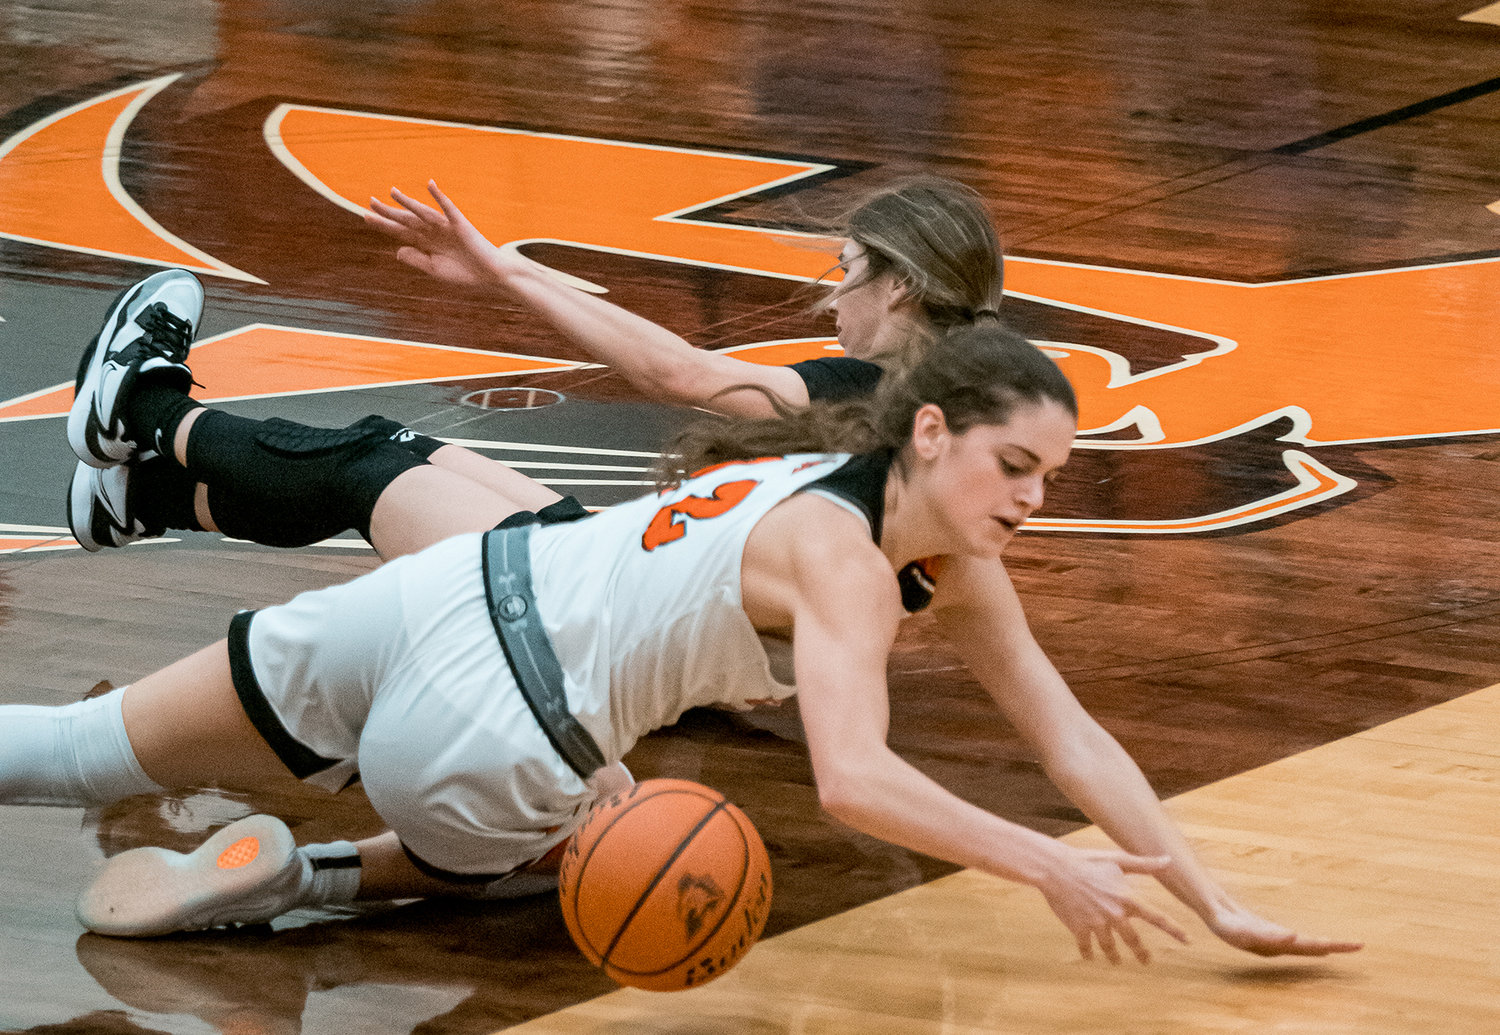 Reagan Davis scrambles for a loose ball after causing a turnover during the girls varsity game on Tuesday, Jan. 17.